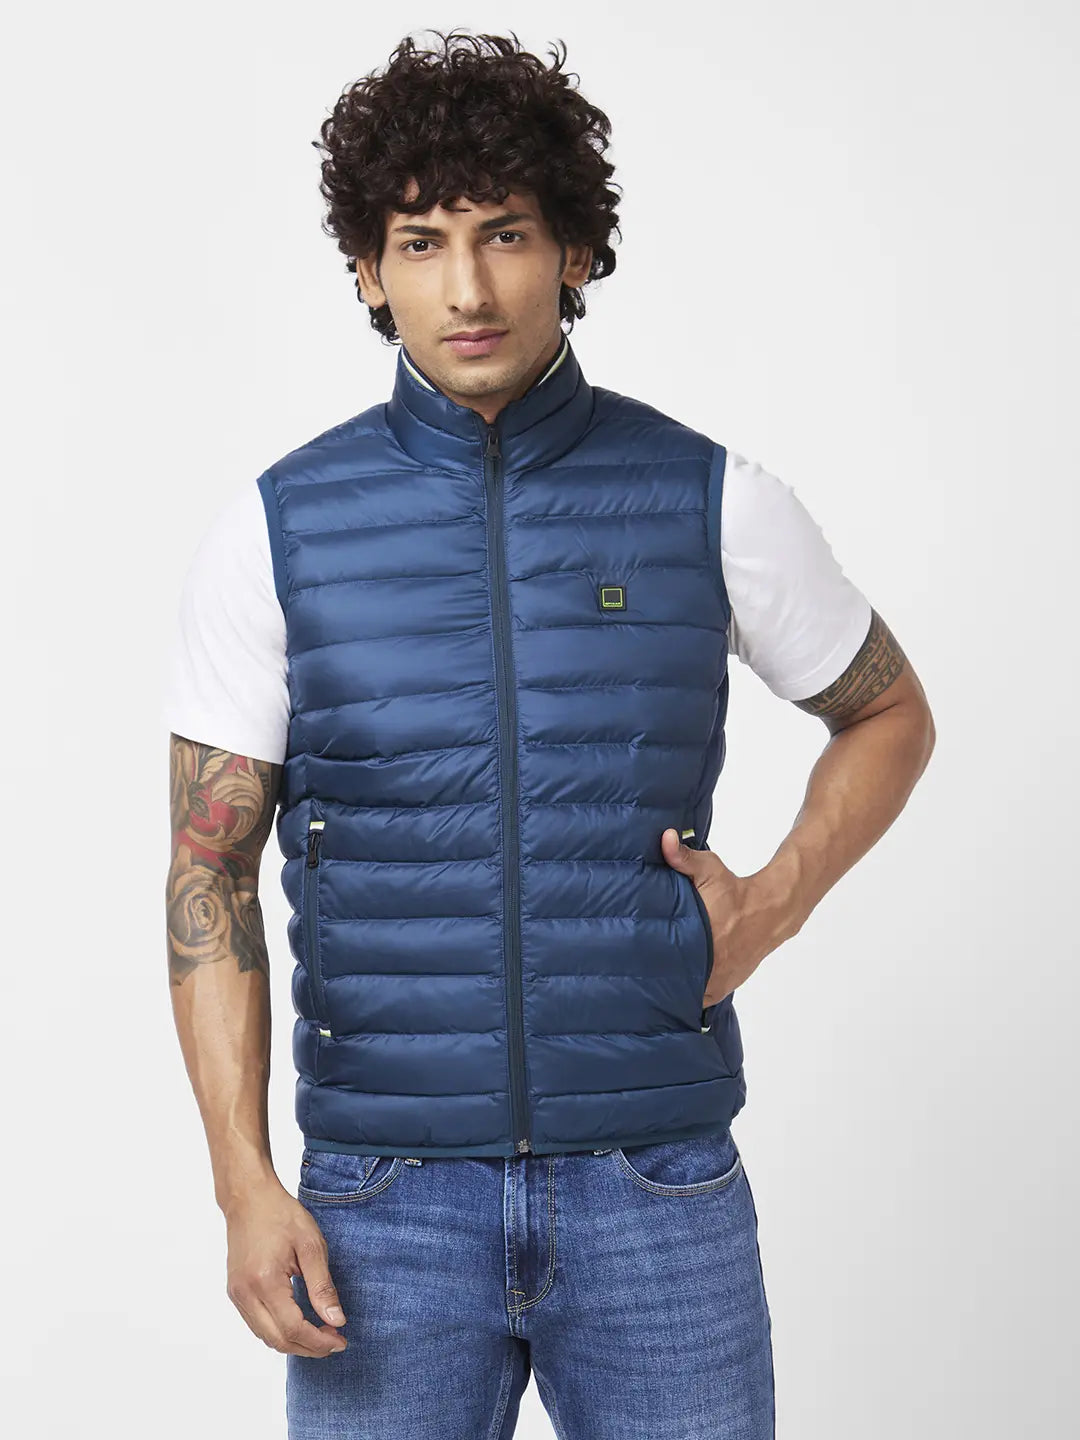 MEN'S SLEEVELESS JACKET WITH CONTRAST NECK TIPPING & BRANDED RIB